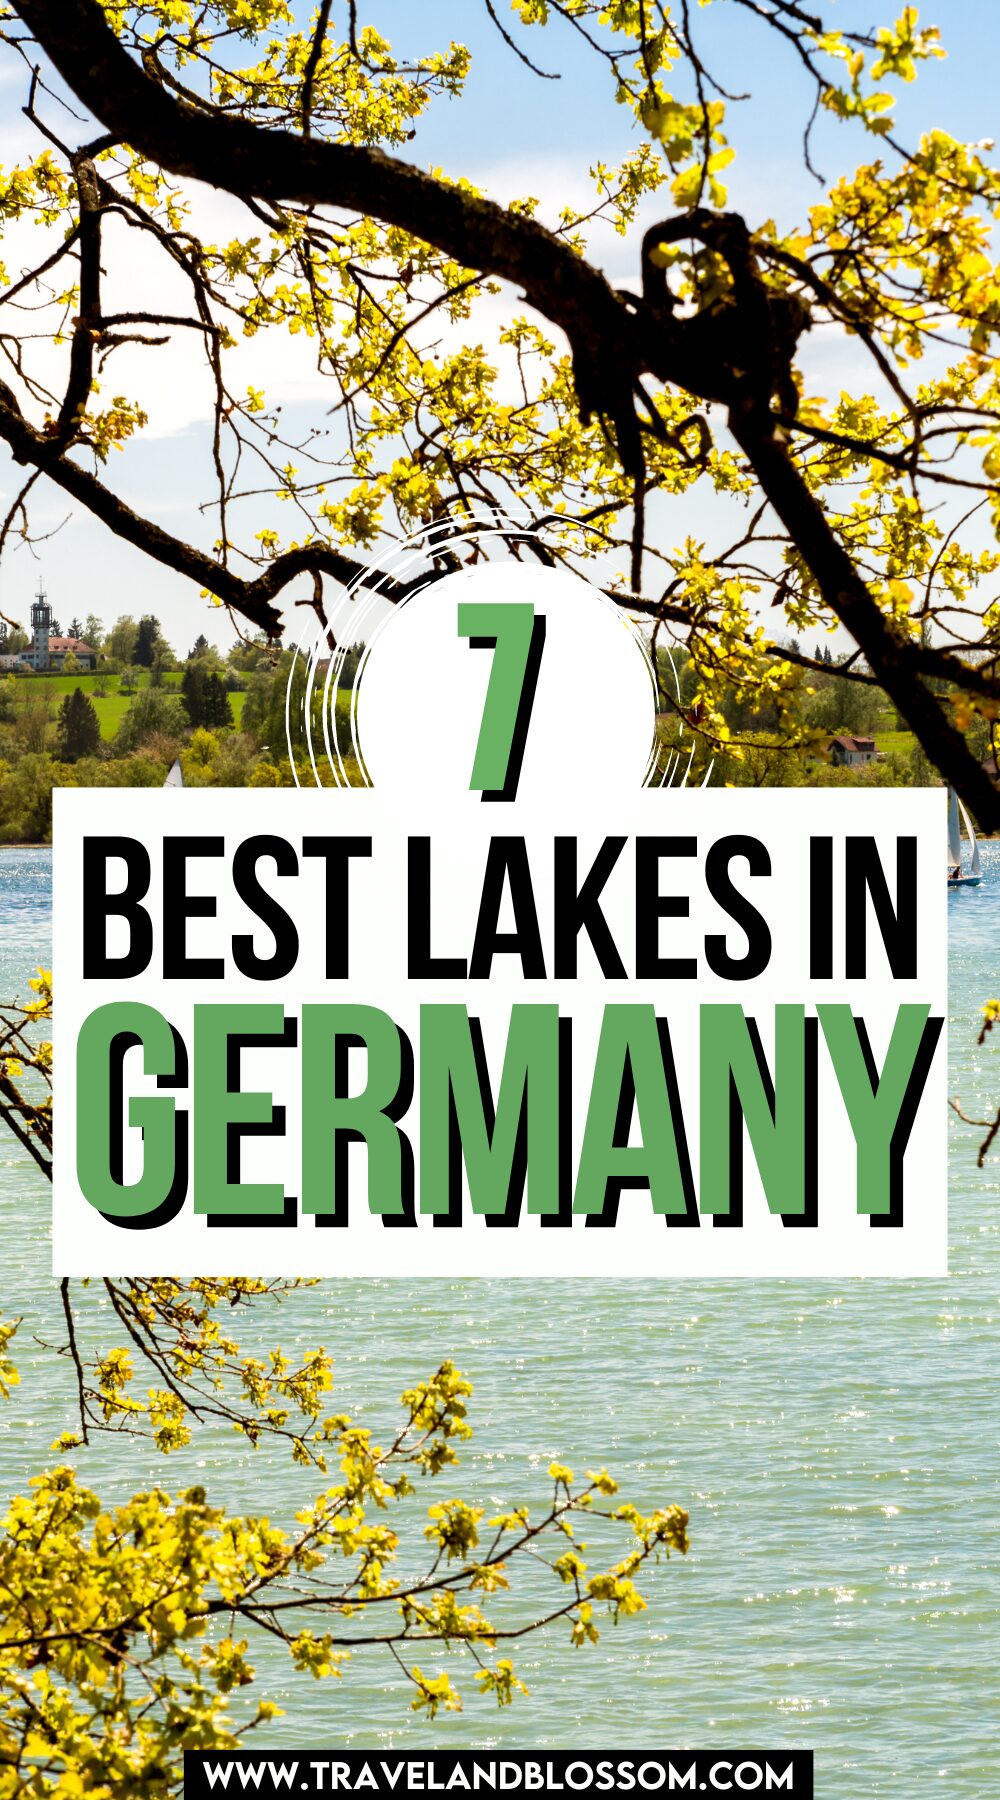 Visit The 7 Best Lakes in Germany for Sightseeing